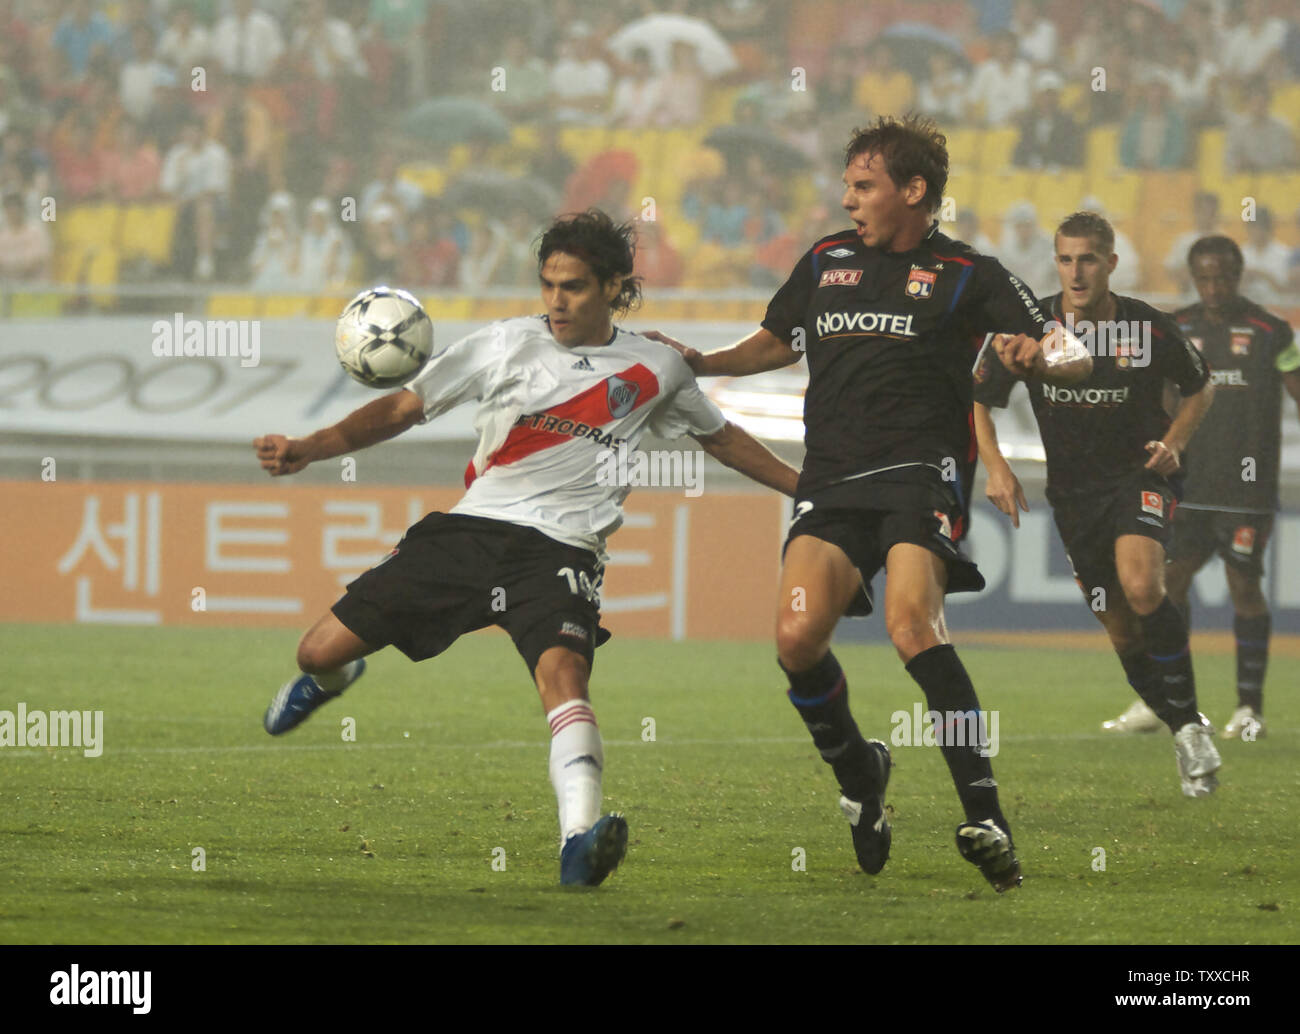 Falcao (L) of River Plate, Argentine, and Sandy Paillot (R) of Lyonnais, France, battle for the ball in the second half on the sixth day of the Peace Cup Korea 2007 at the Suwon Worldcup Stadium, South Korea, on July 19, 2007. Lyonnais beat River Plate 3-1. (UPI Photo/Keizo Mori) Stock Photo